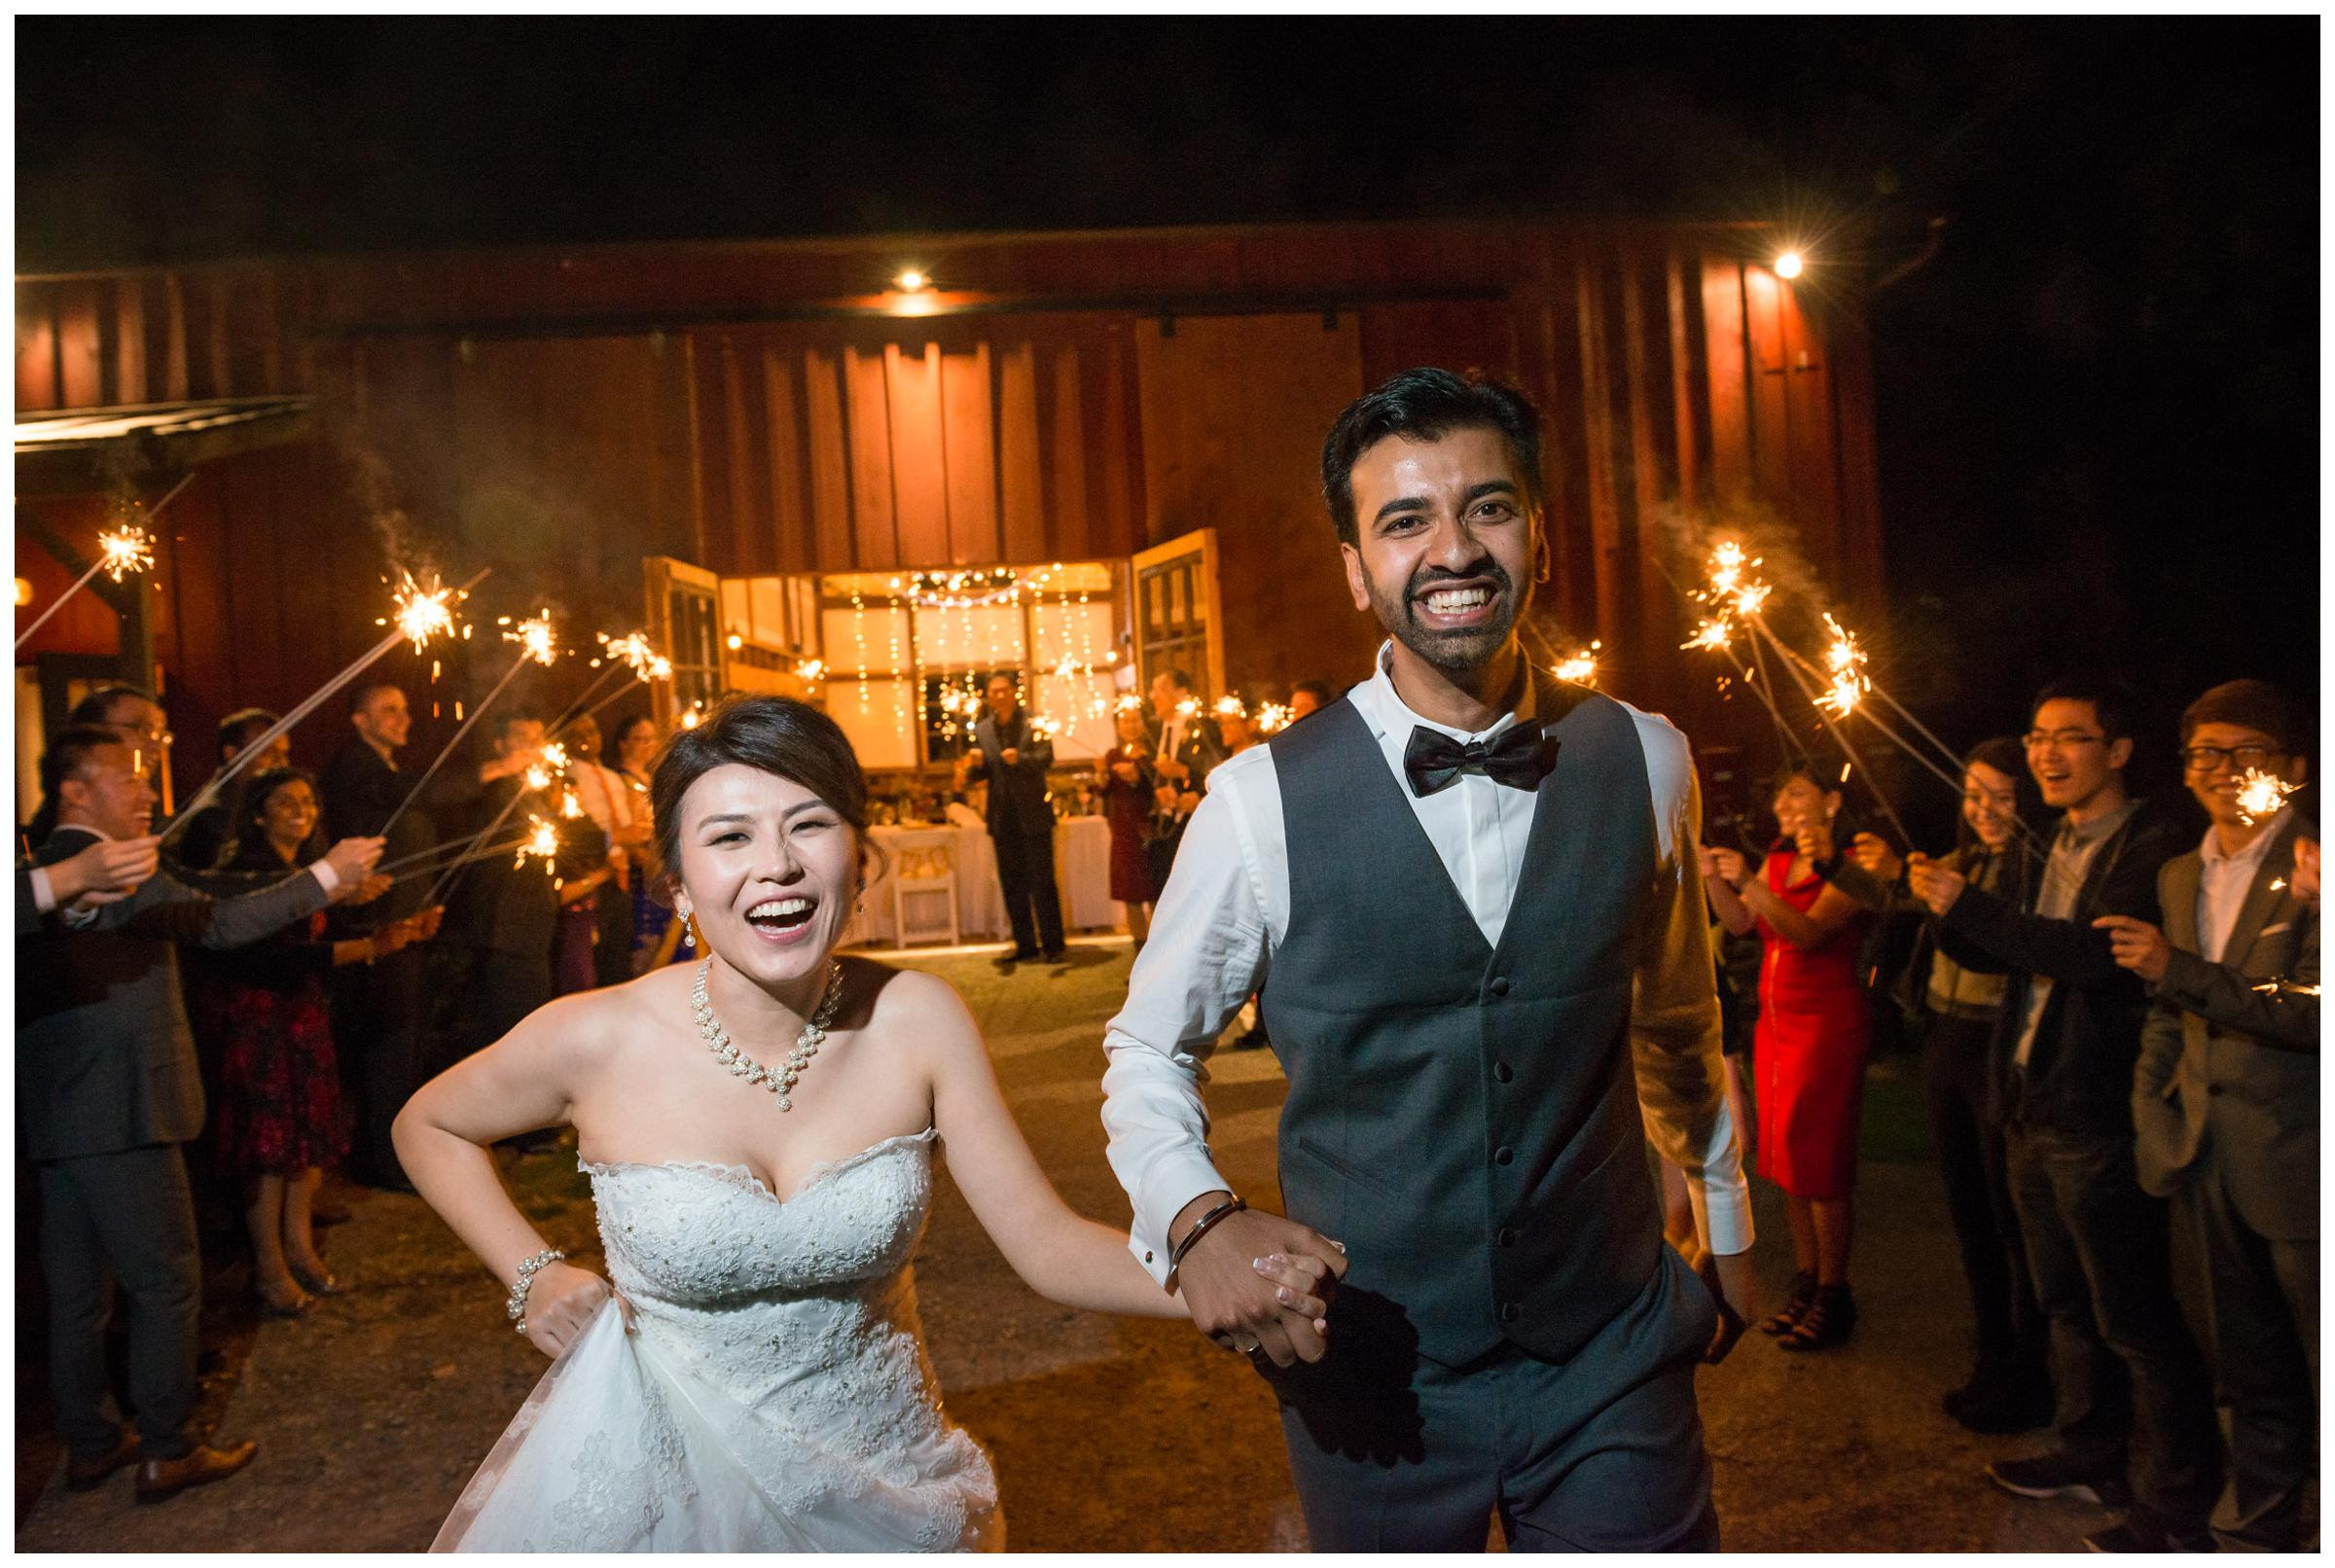 How To Use Sparklers At A Wedding
 Must know tips for the best wedding sparkler send off